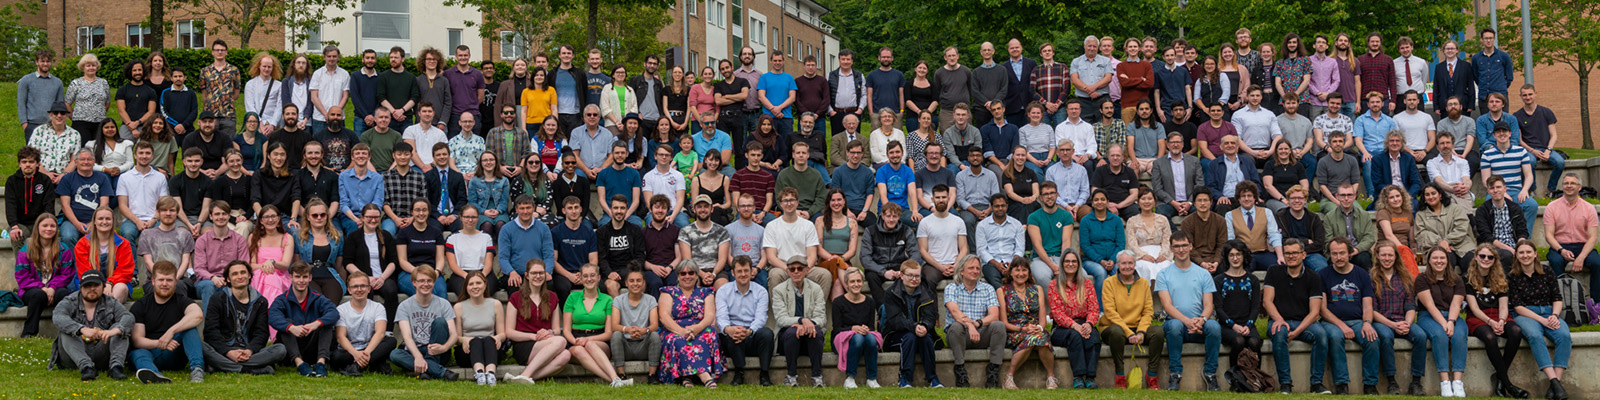 A photo featuring staff and students from Lancaster University's Physics Department